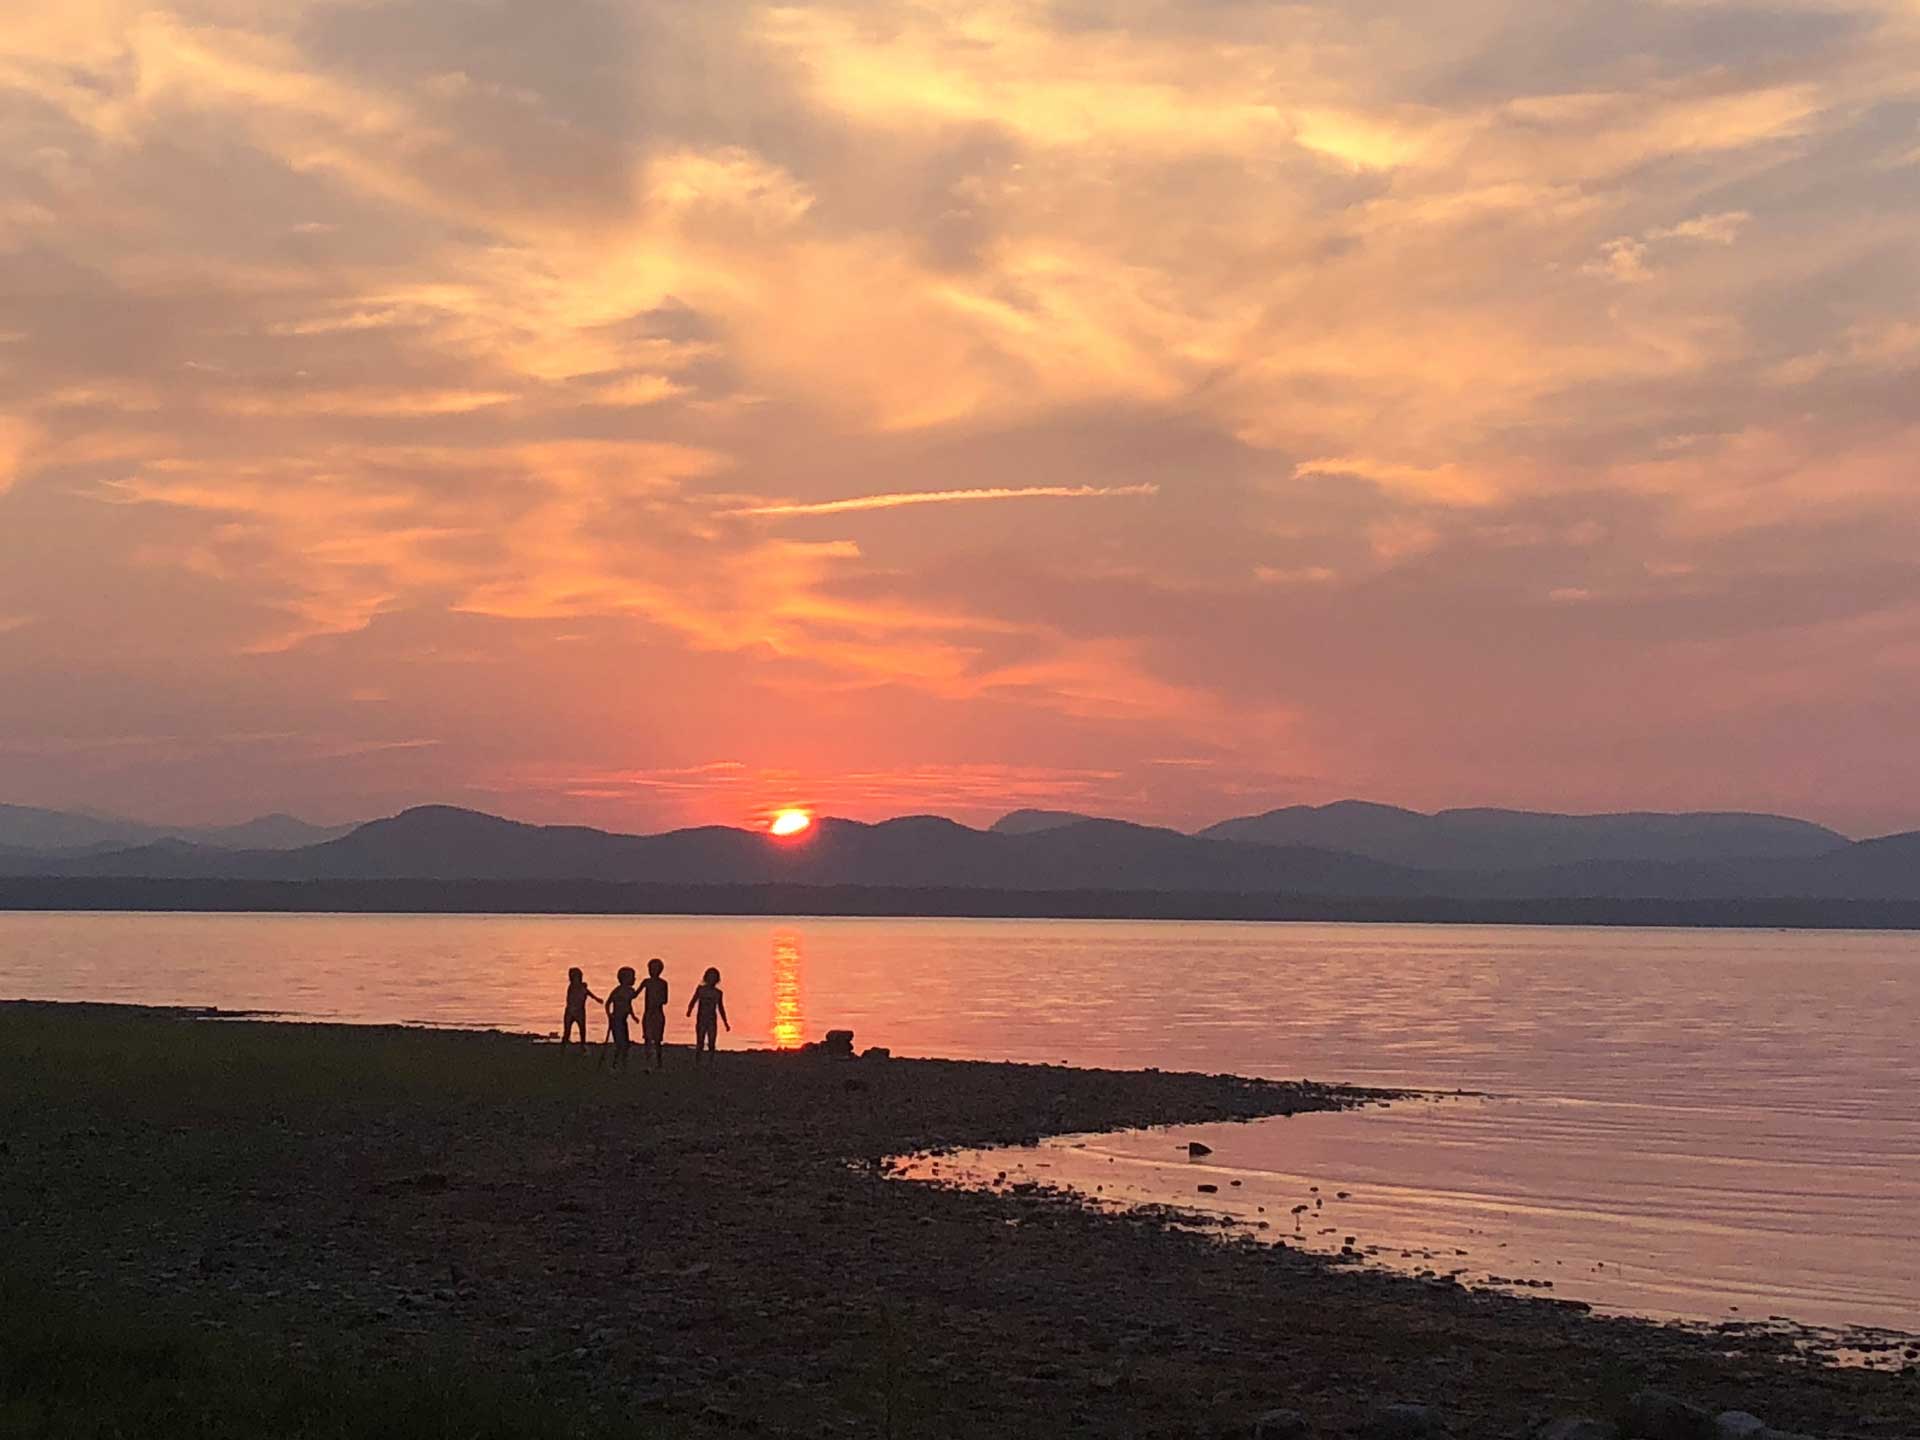 Children playing on the beach at sunset in Charlotte, VT